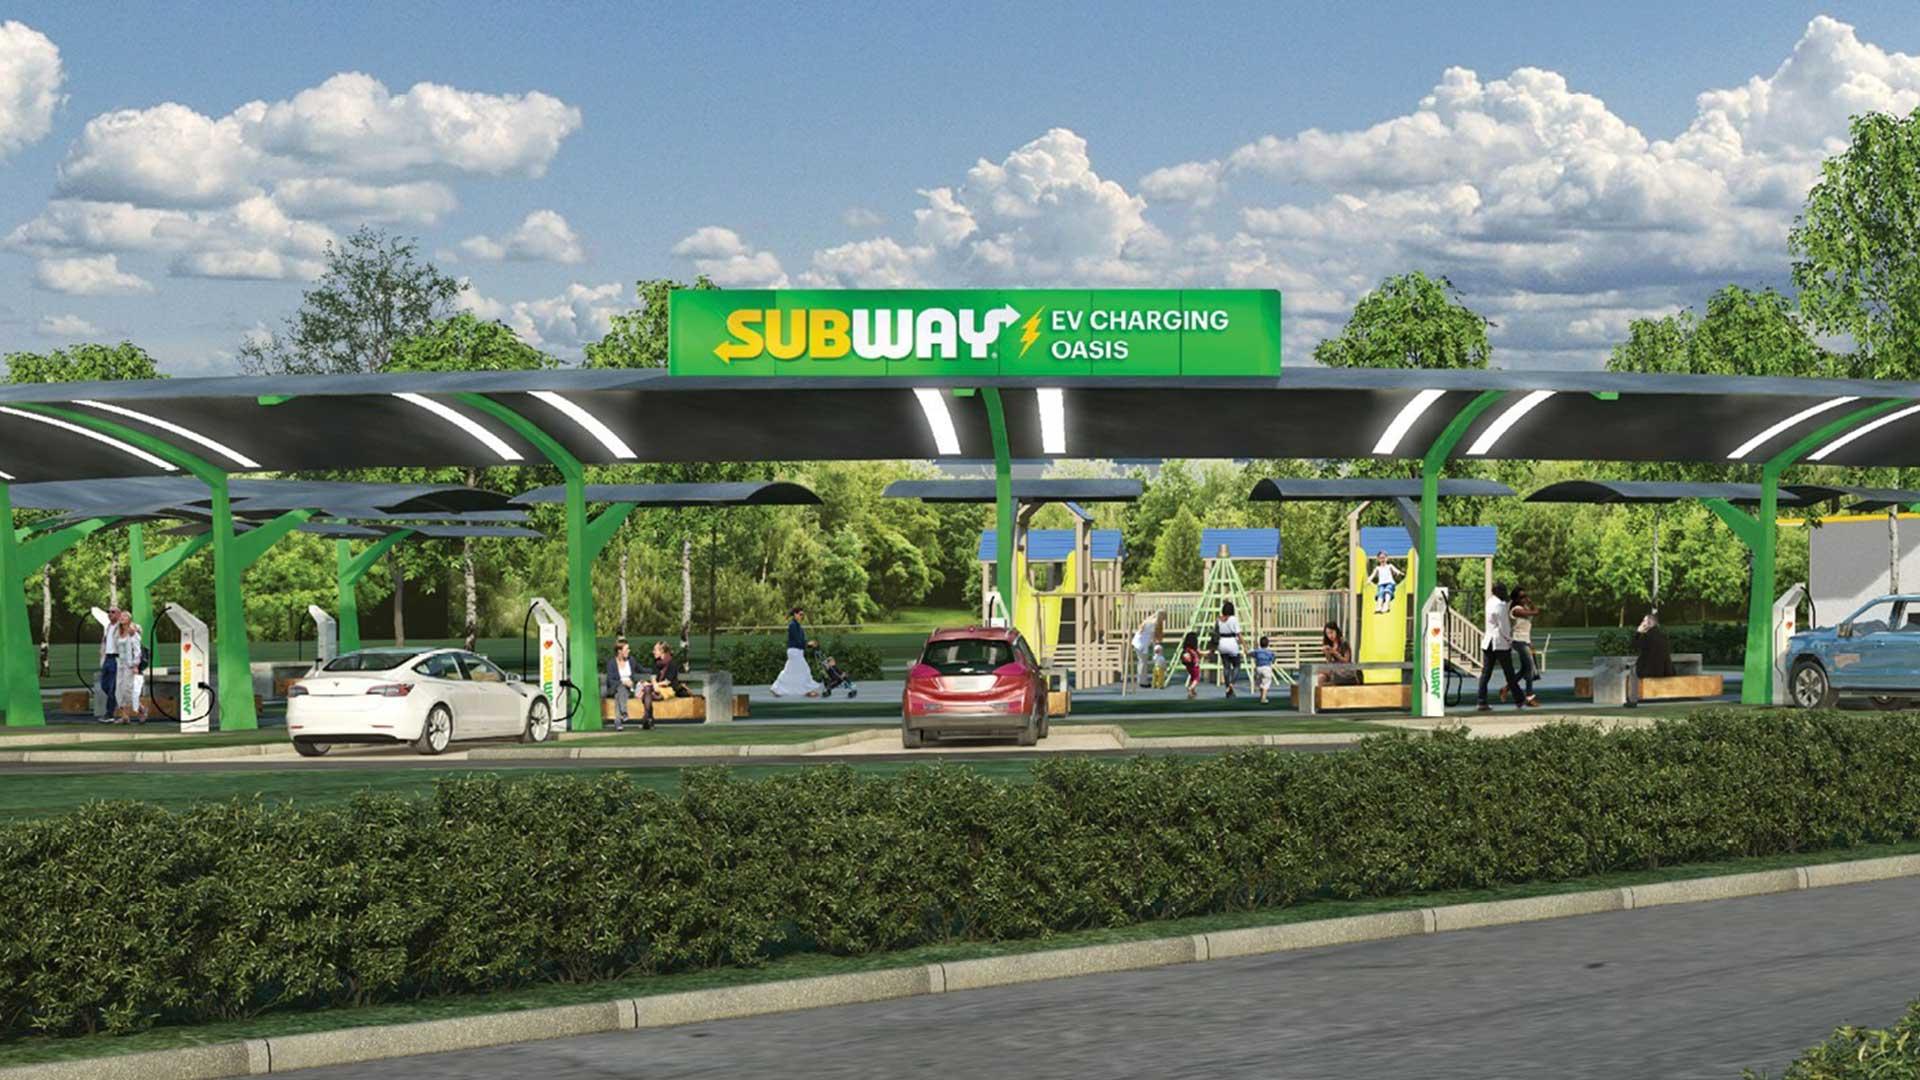 A sandwich chain tunnel is going to create a ‘charging paradise’ for EV drivers